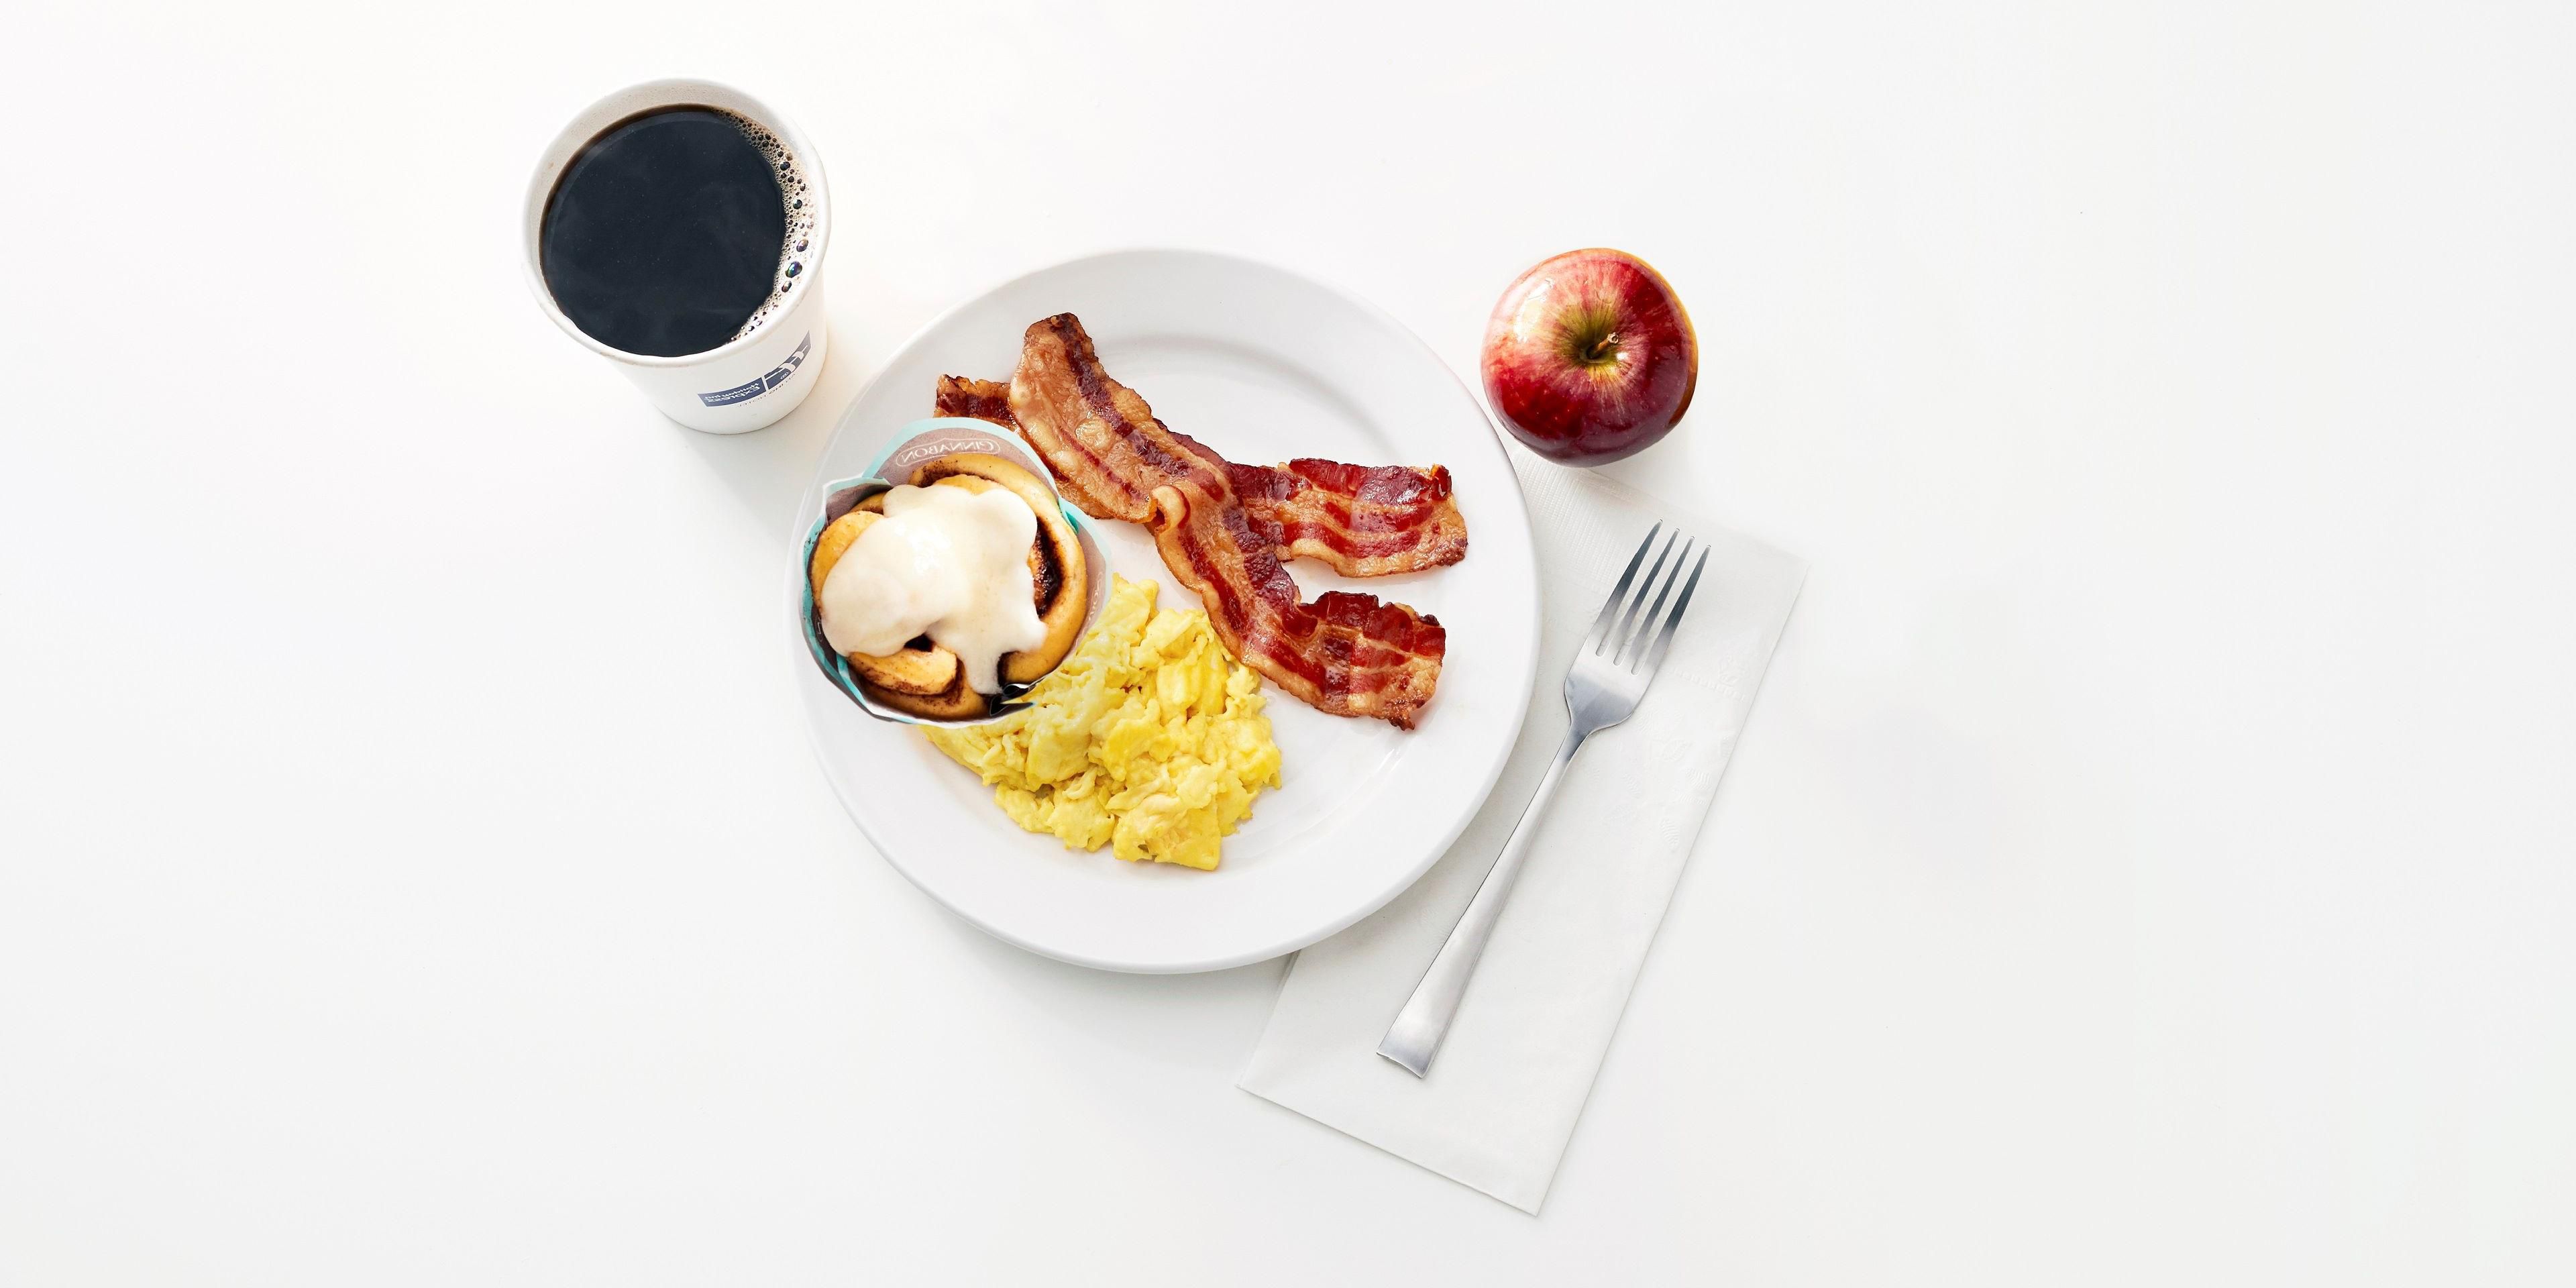 Kick start your day with our free Express Start Breakfast, with grab ‘n’ go options and favorites such as eggs and bacon, hot pancakes, our signature cinnamon rolls and fresh coffee. Offered Monday-Friday from 6:30AM to 9:30AM and Saturday-Sunday from 7:00AM to 10:00AM.